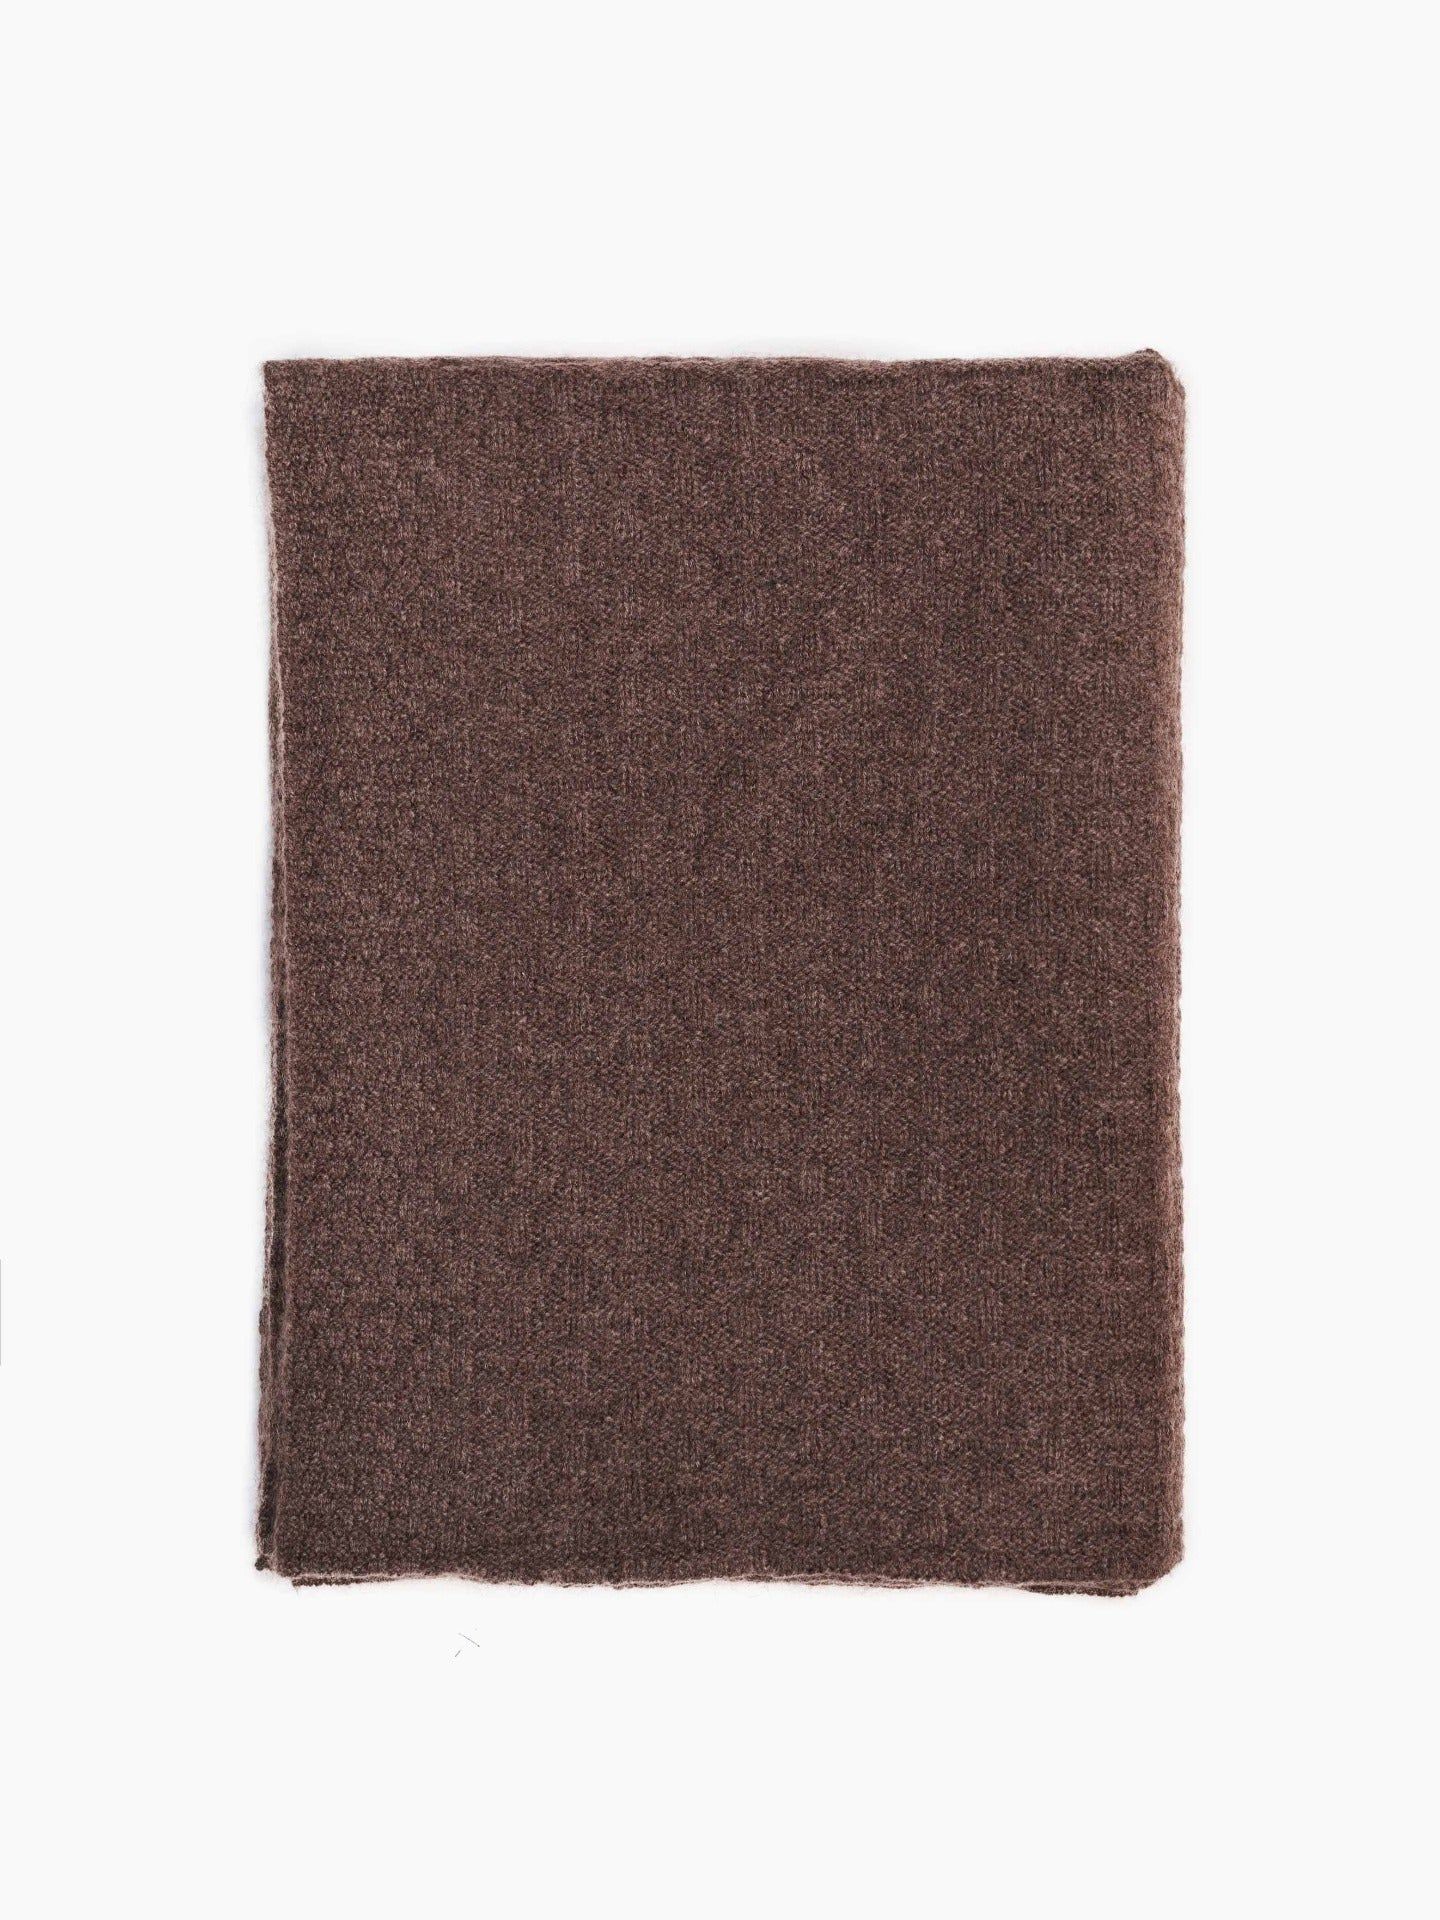 Cashmere Knit Blanket With Links Pattern Cocoa - Gobi Cashmere